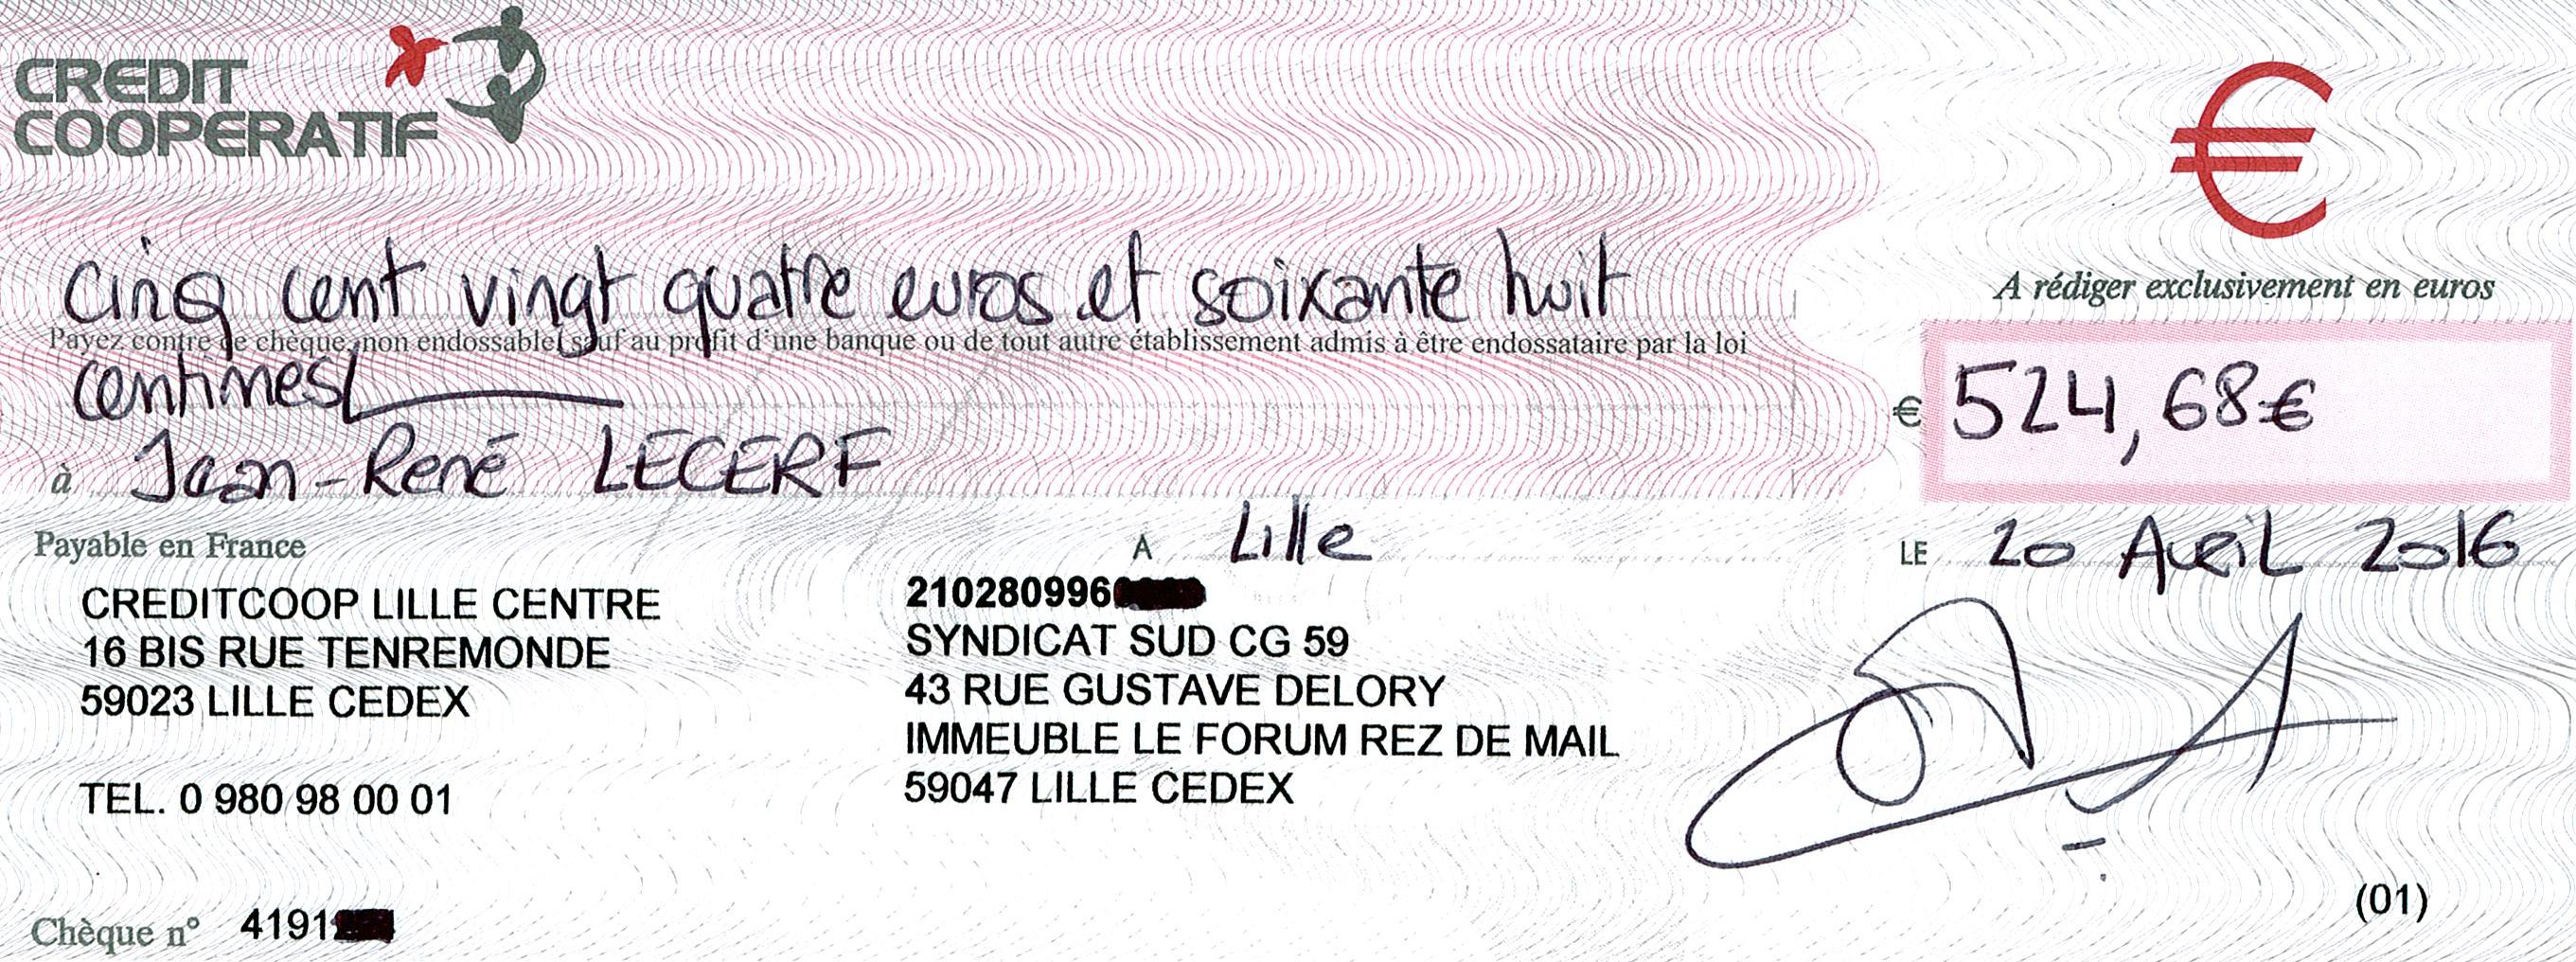 cheque_lecerf